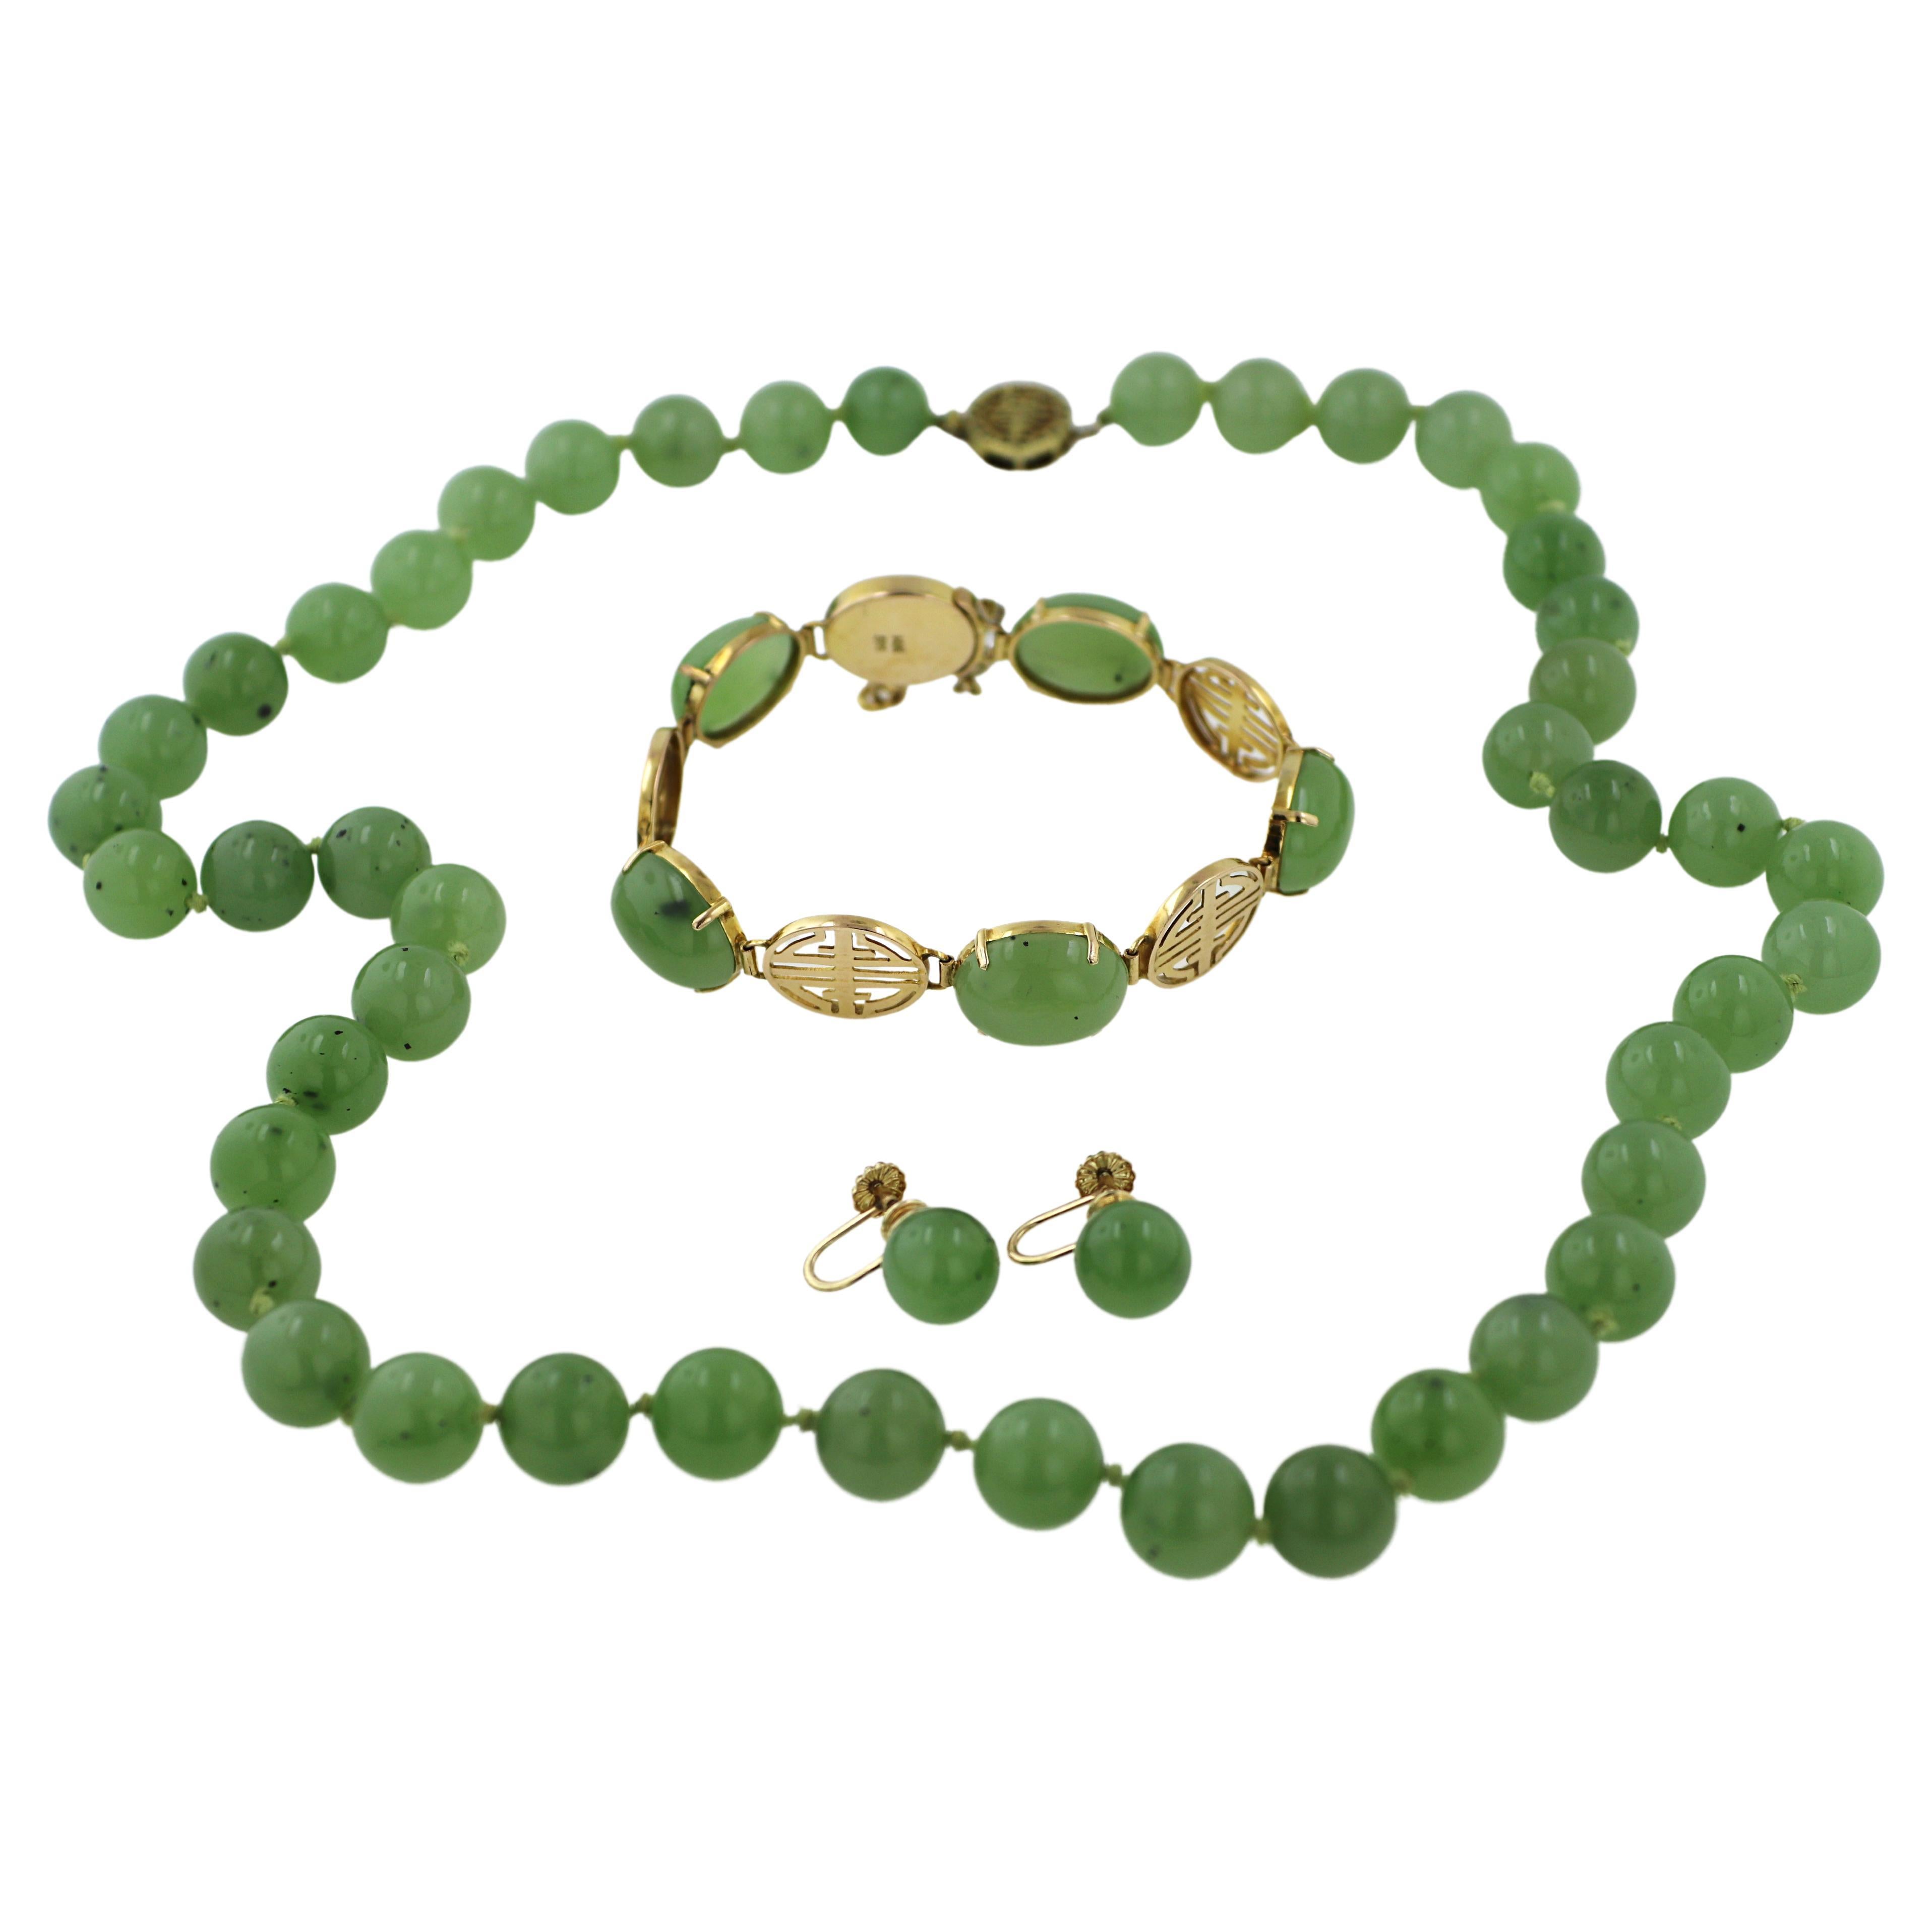 Siberian Nephrite Jade, 14k Gold Necklace, Bracelet and Earrings Jewelry Suite For Sale